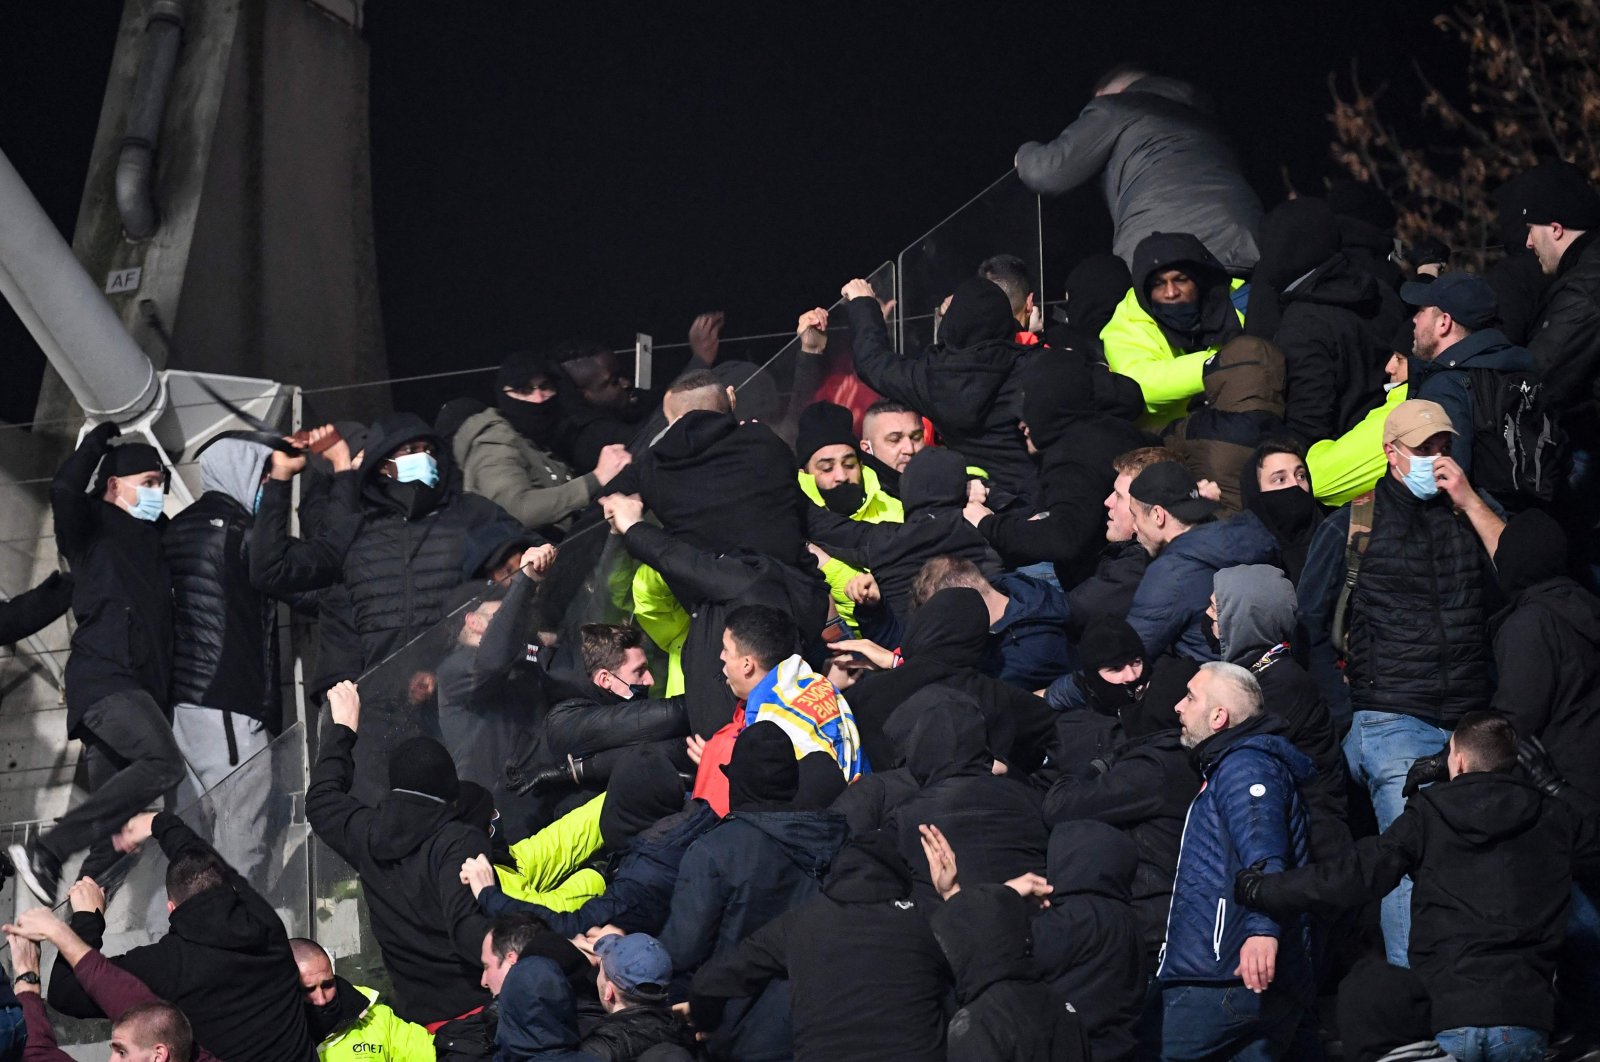 Security staff intervenes as supporters clash during a French Cup match between Paris FC and Olympique Lyonnais, Paris, France, Dec. 17, 2021. (AFP Photo)